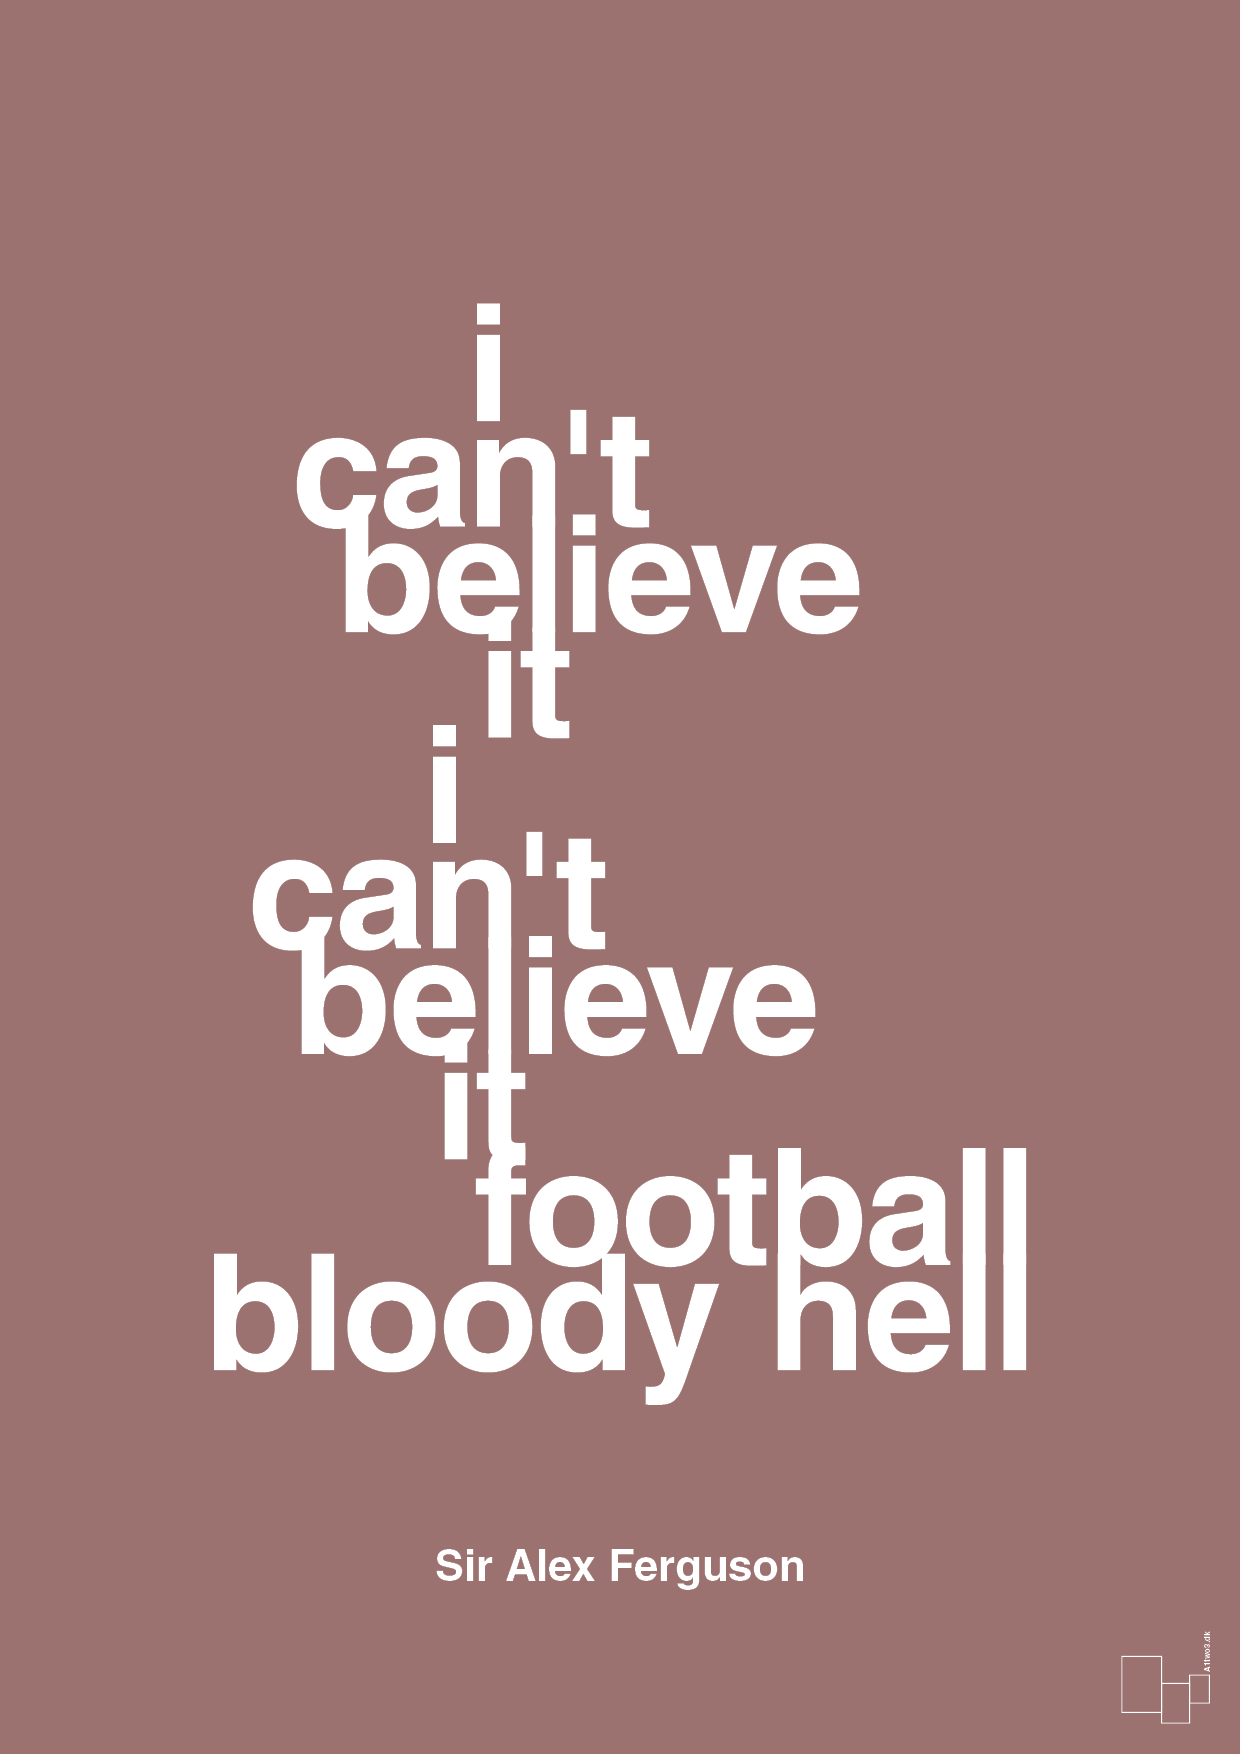 i can't believe it i can't believe it football bloody hell - Plakat med Citater i Plum